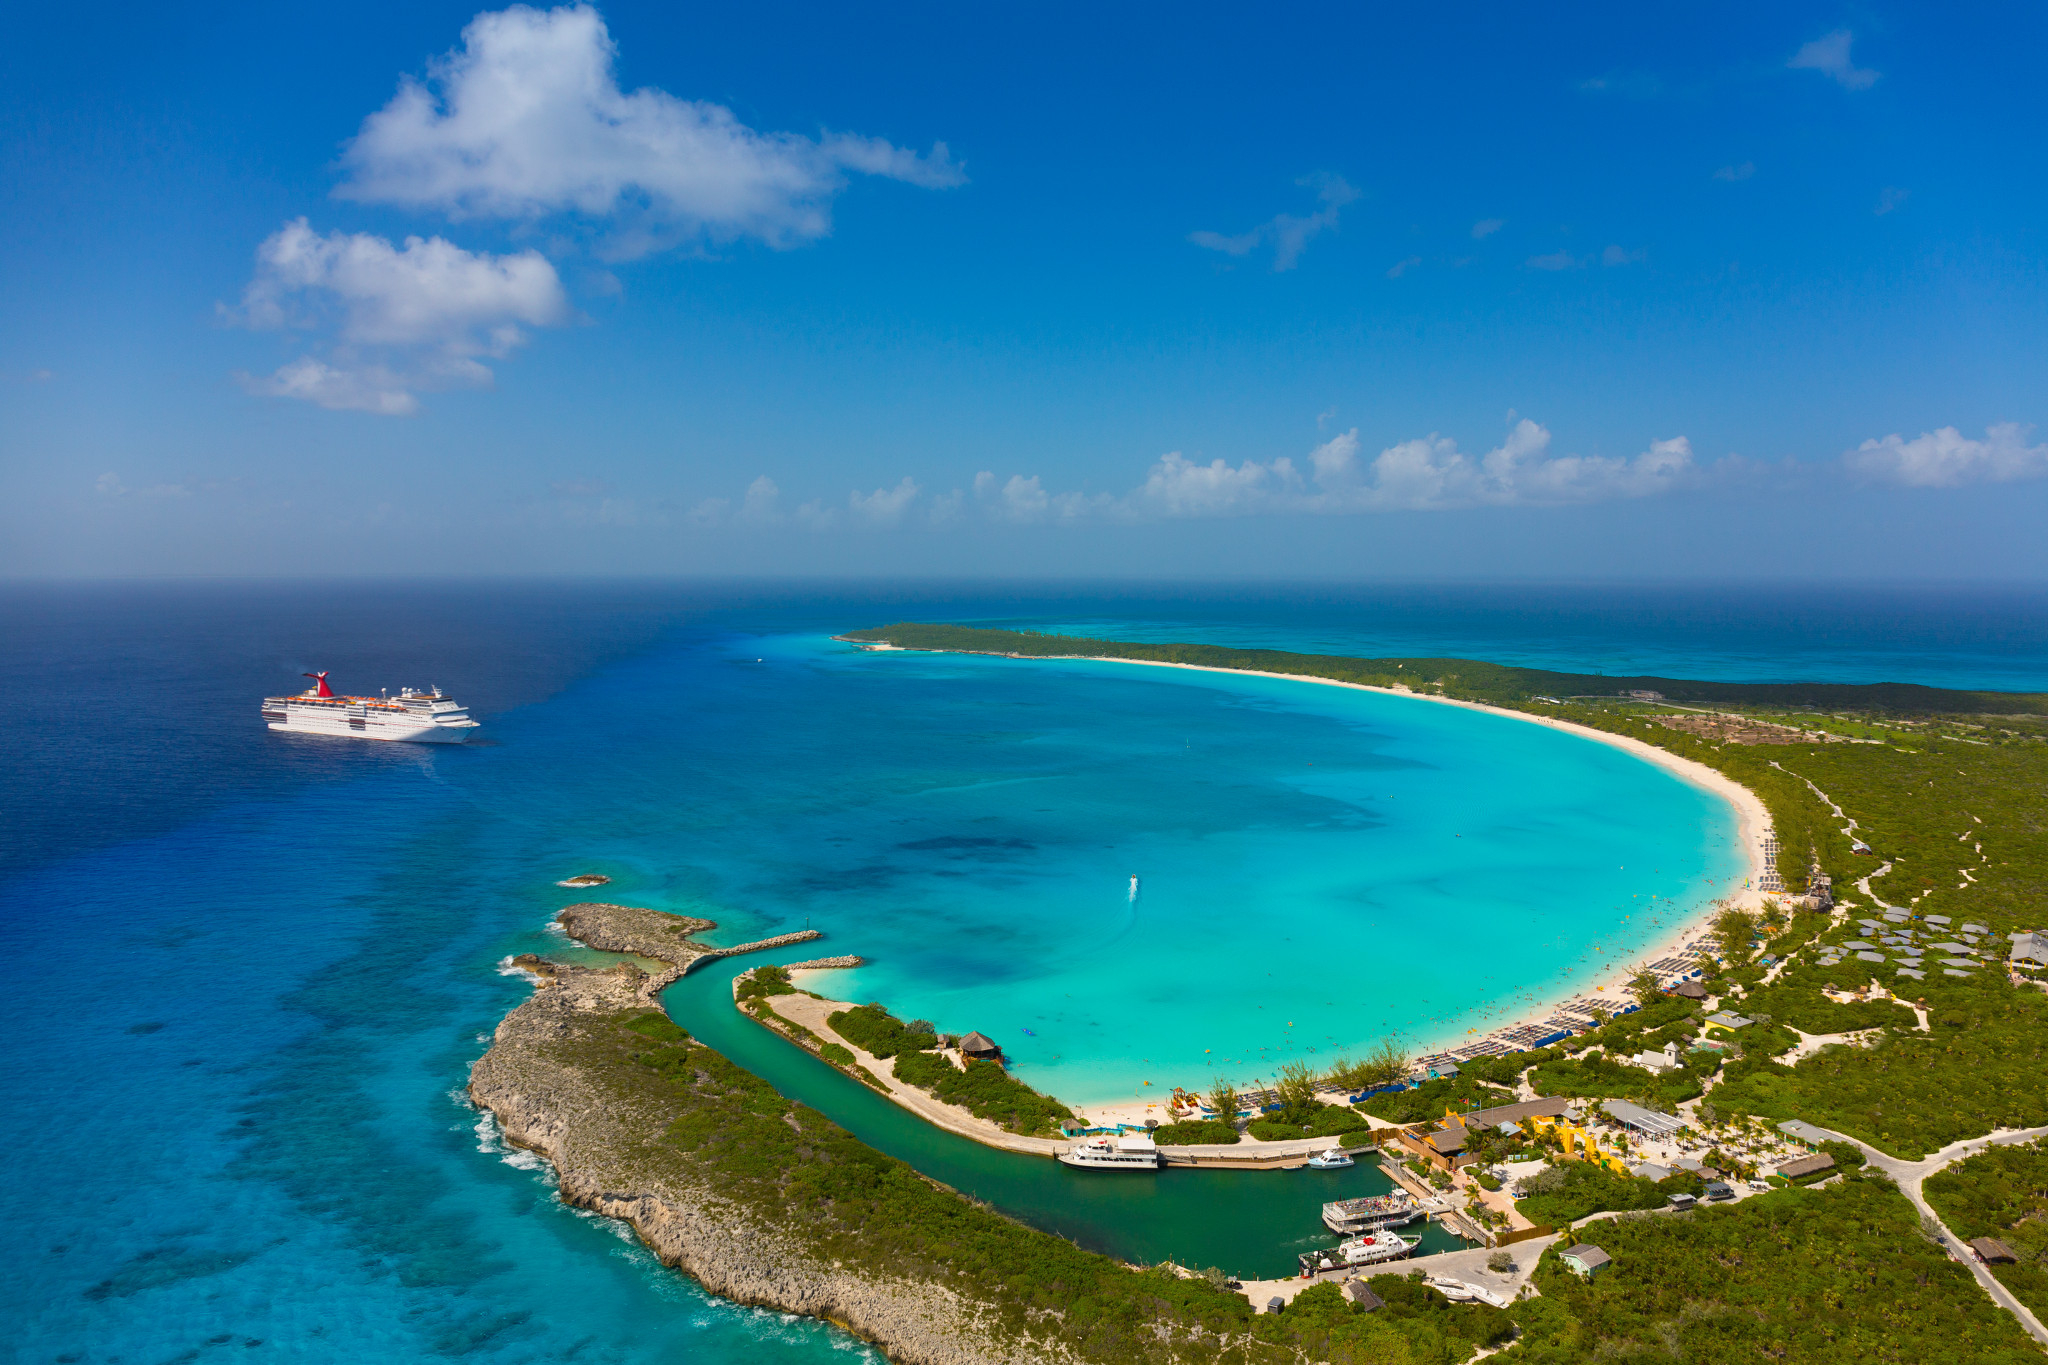 Cruise Destination Guides - Guide to Carnival Cruise Line's Private Bahamas Island Half Moon Cay